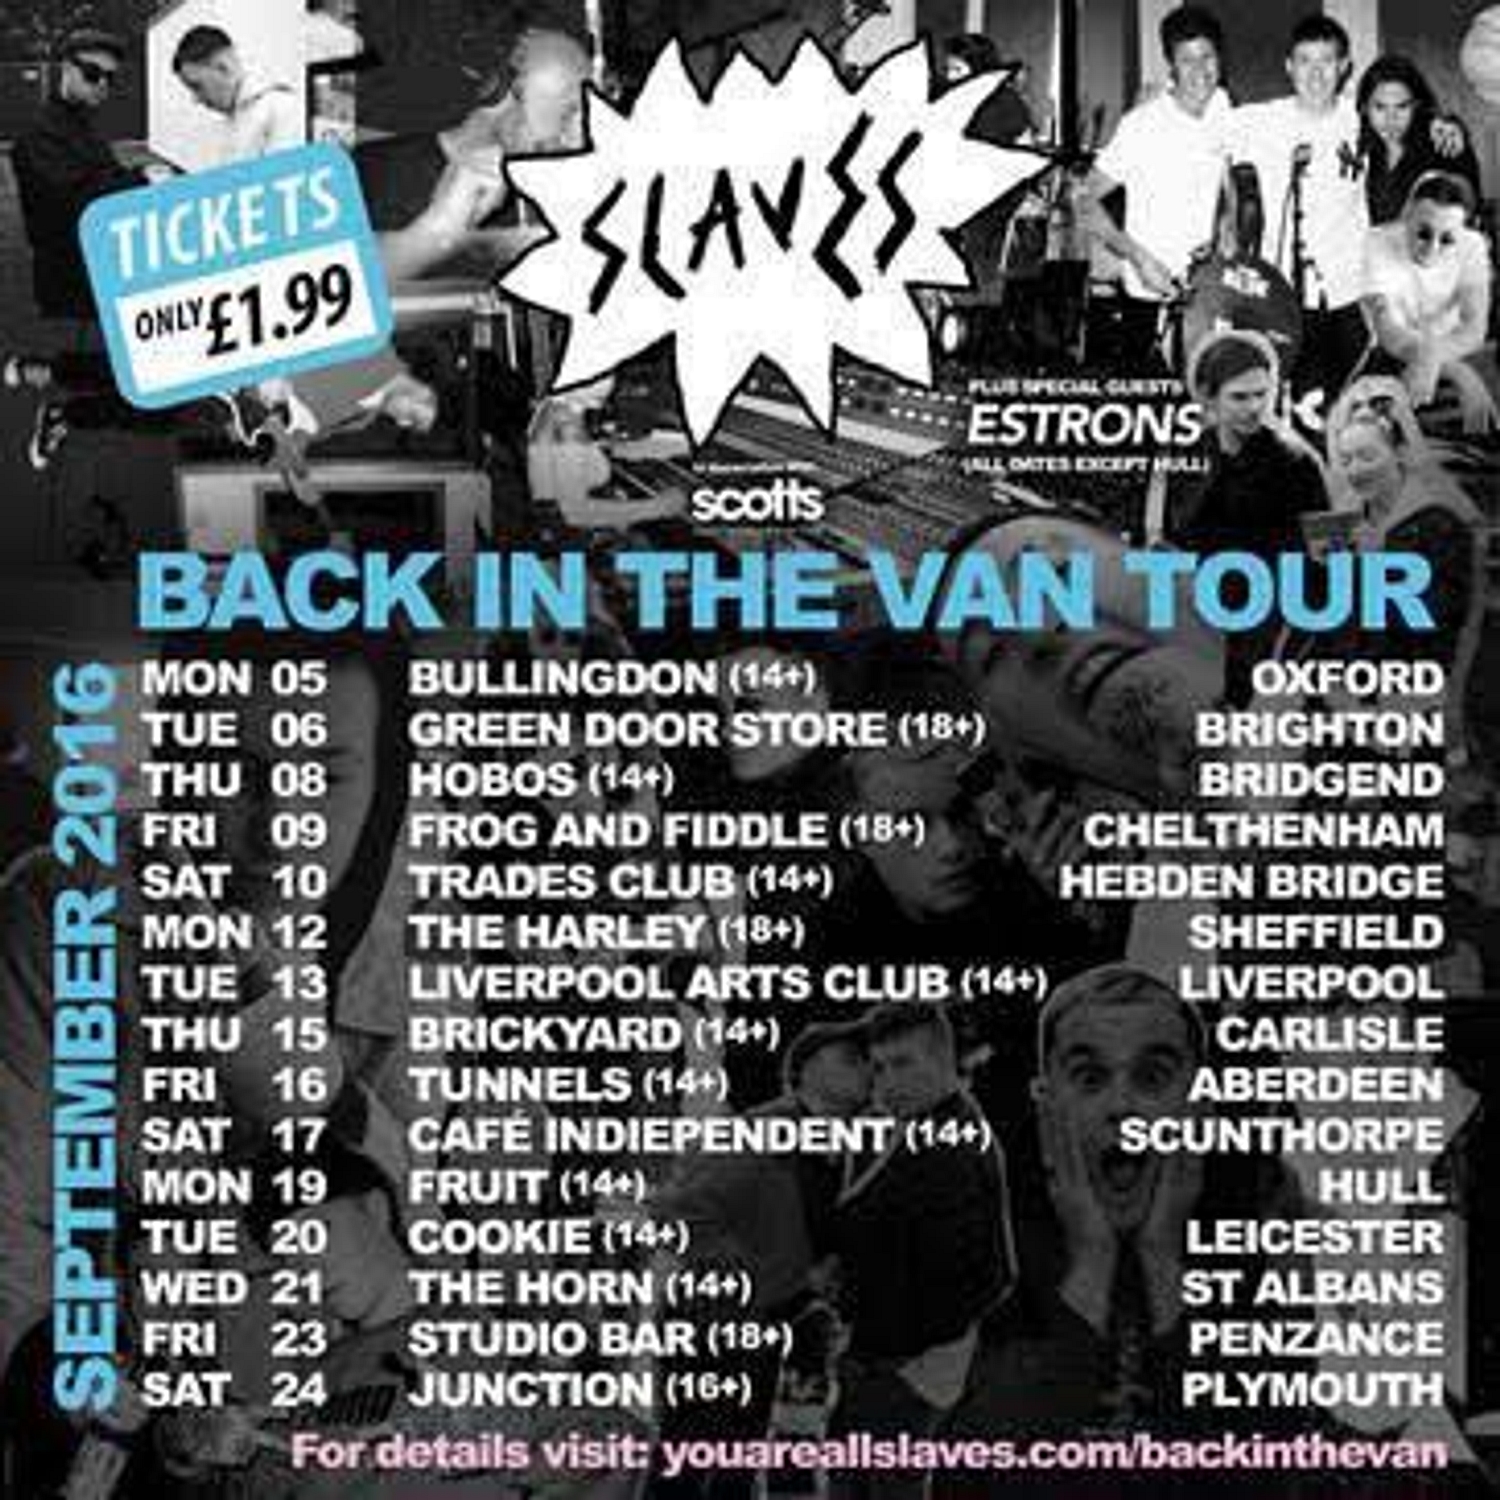 Slaves announce UK club tour, and tickets are only £1.99